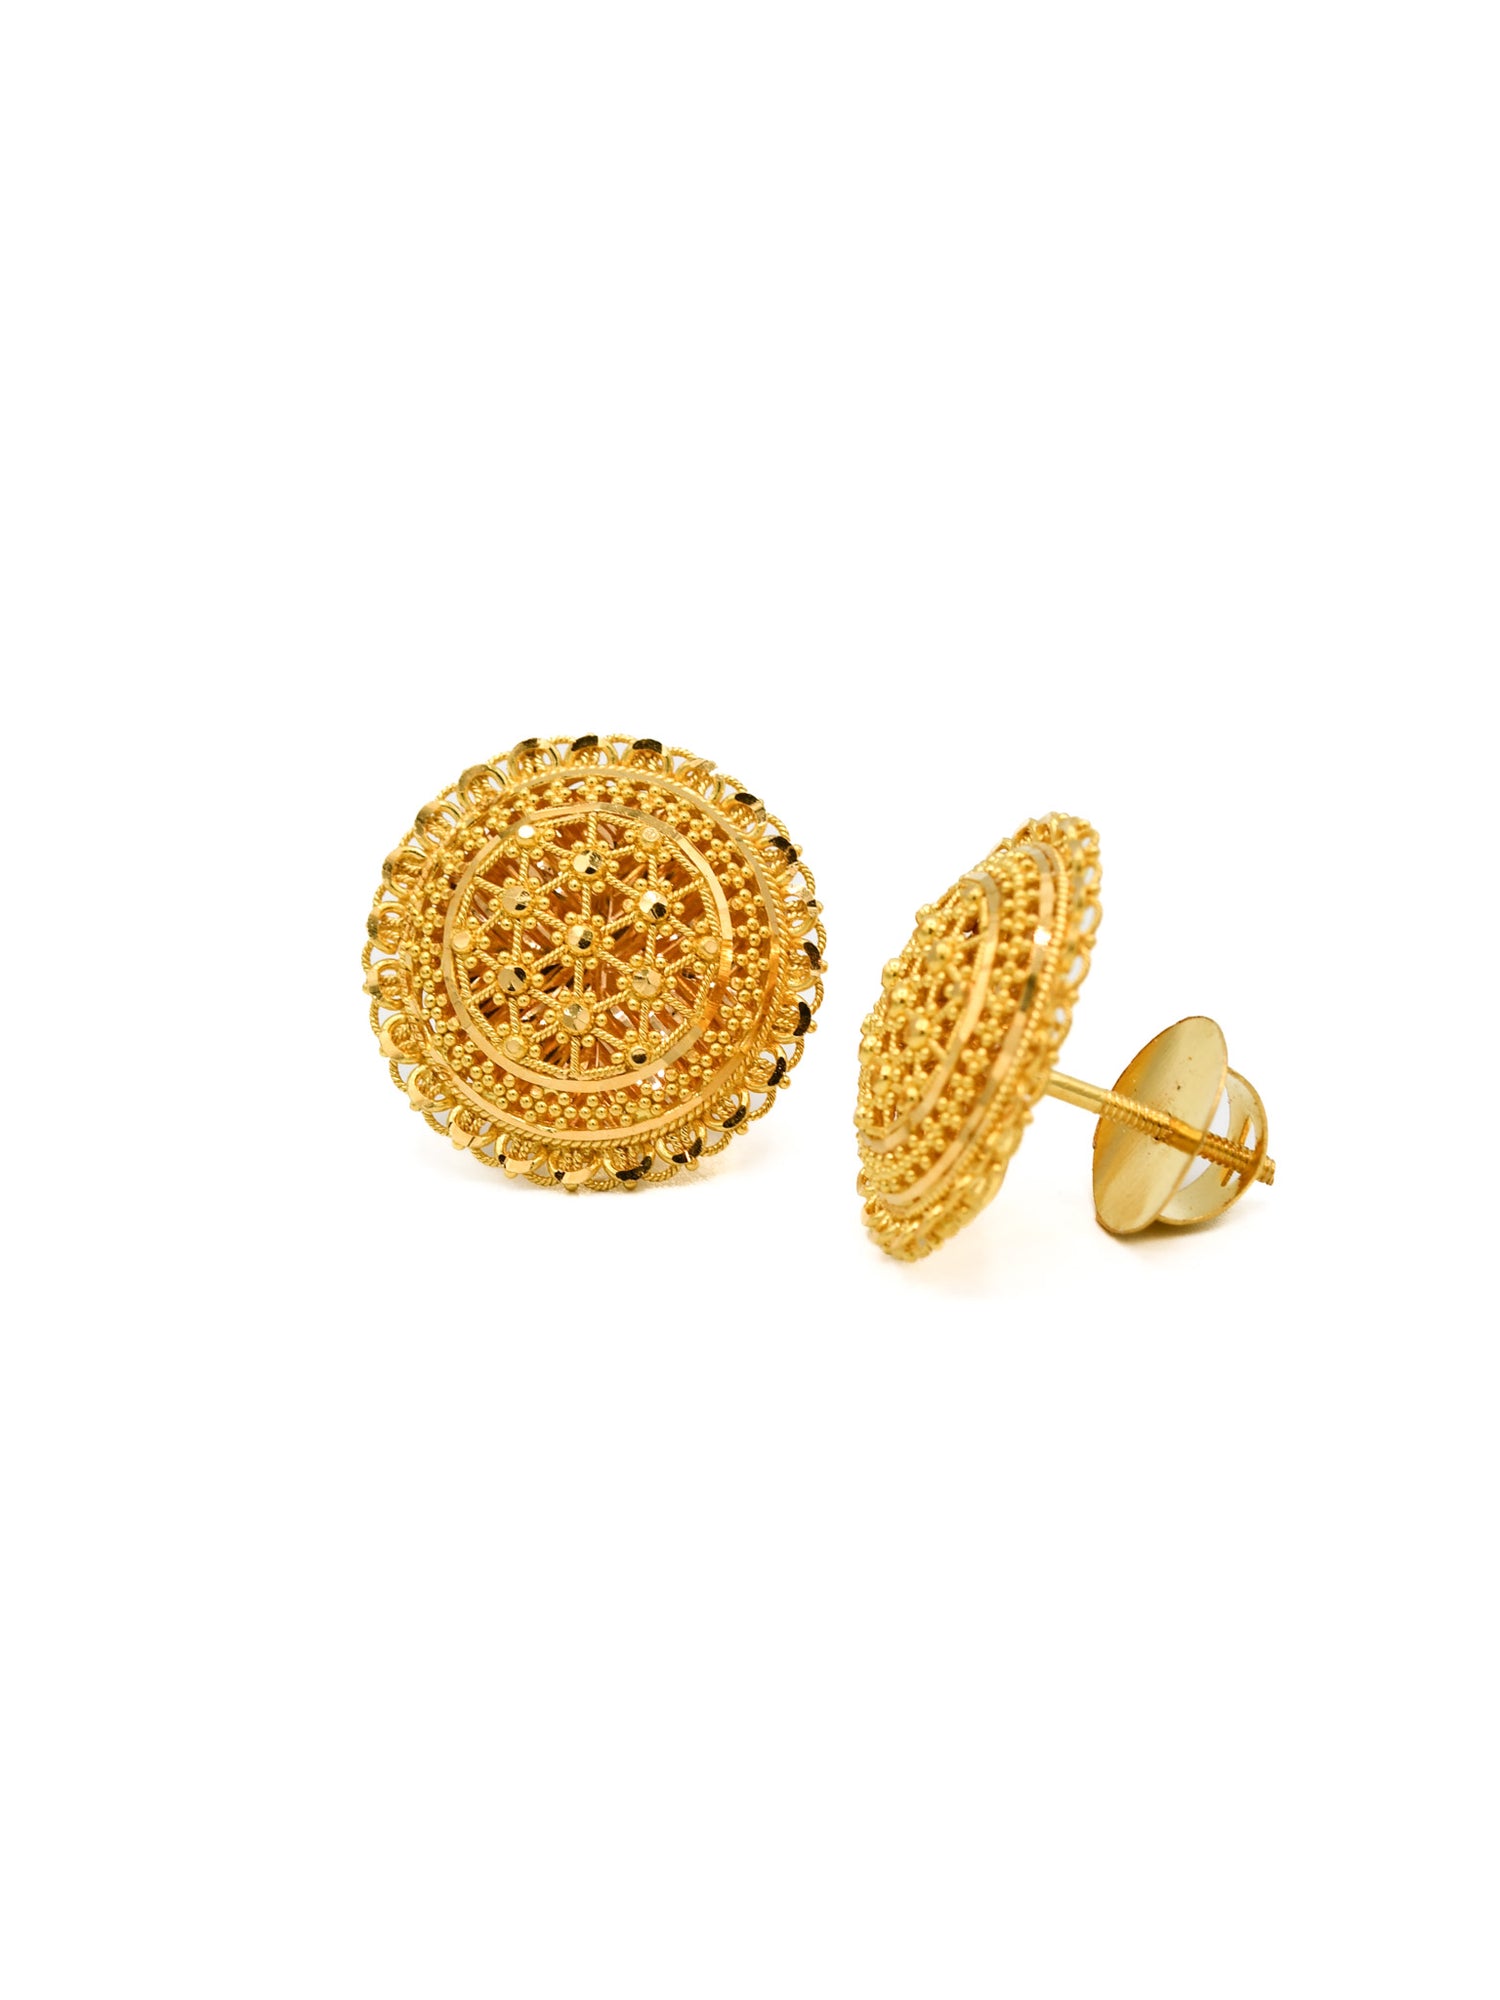 22ct Gold Round Tops - Roop Darshan